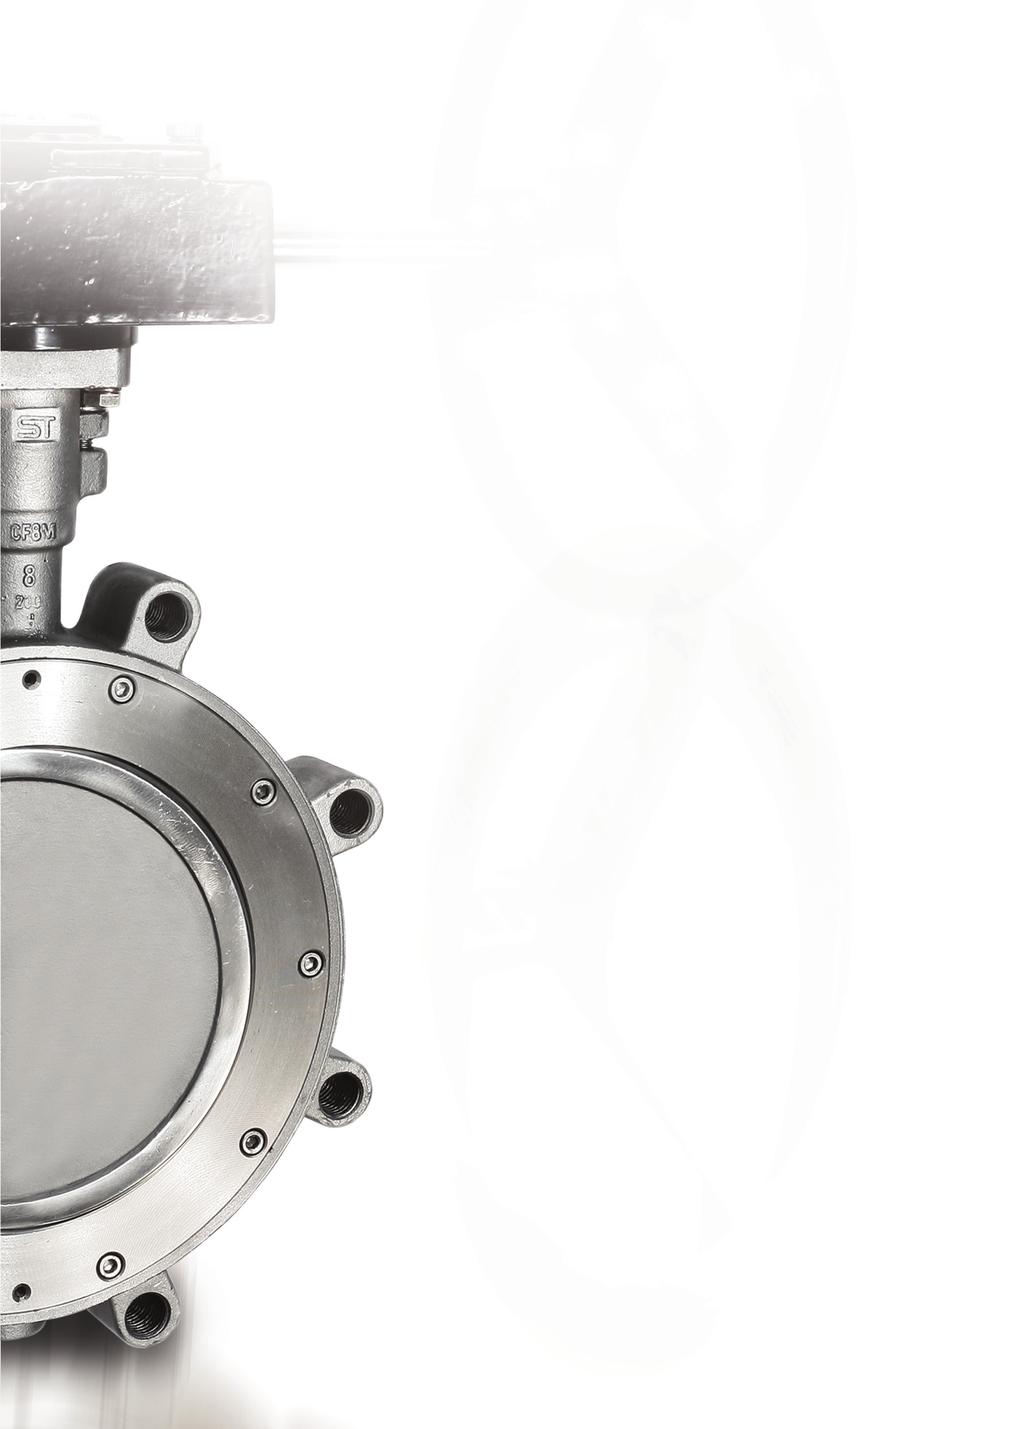 High Performance Butterfly Valve STHW STHL Size : 2 ~ 24 Type: Wafer, Lug Pressure Rating: Class 150, 300 Body Material: Cast Steel and Stainless Steel Seat Material: Soft Seat (PTFE / RTFE) NBR,